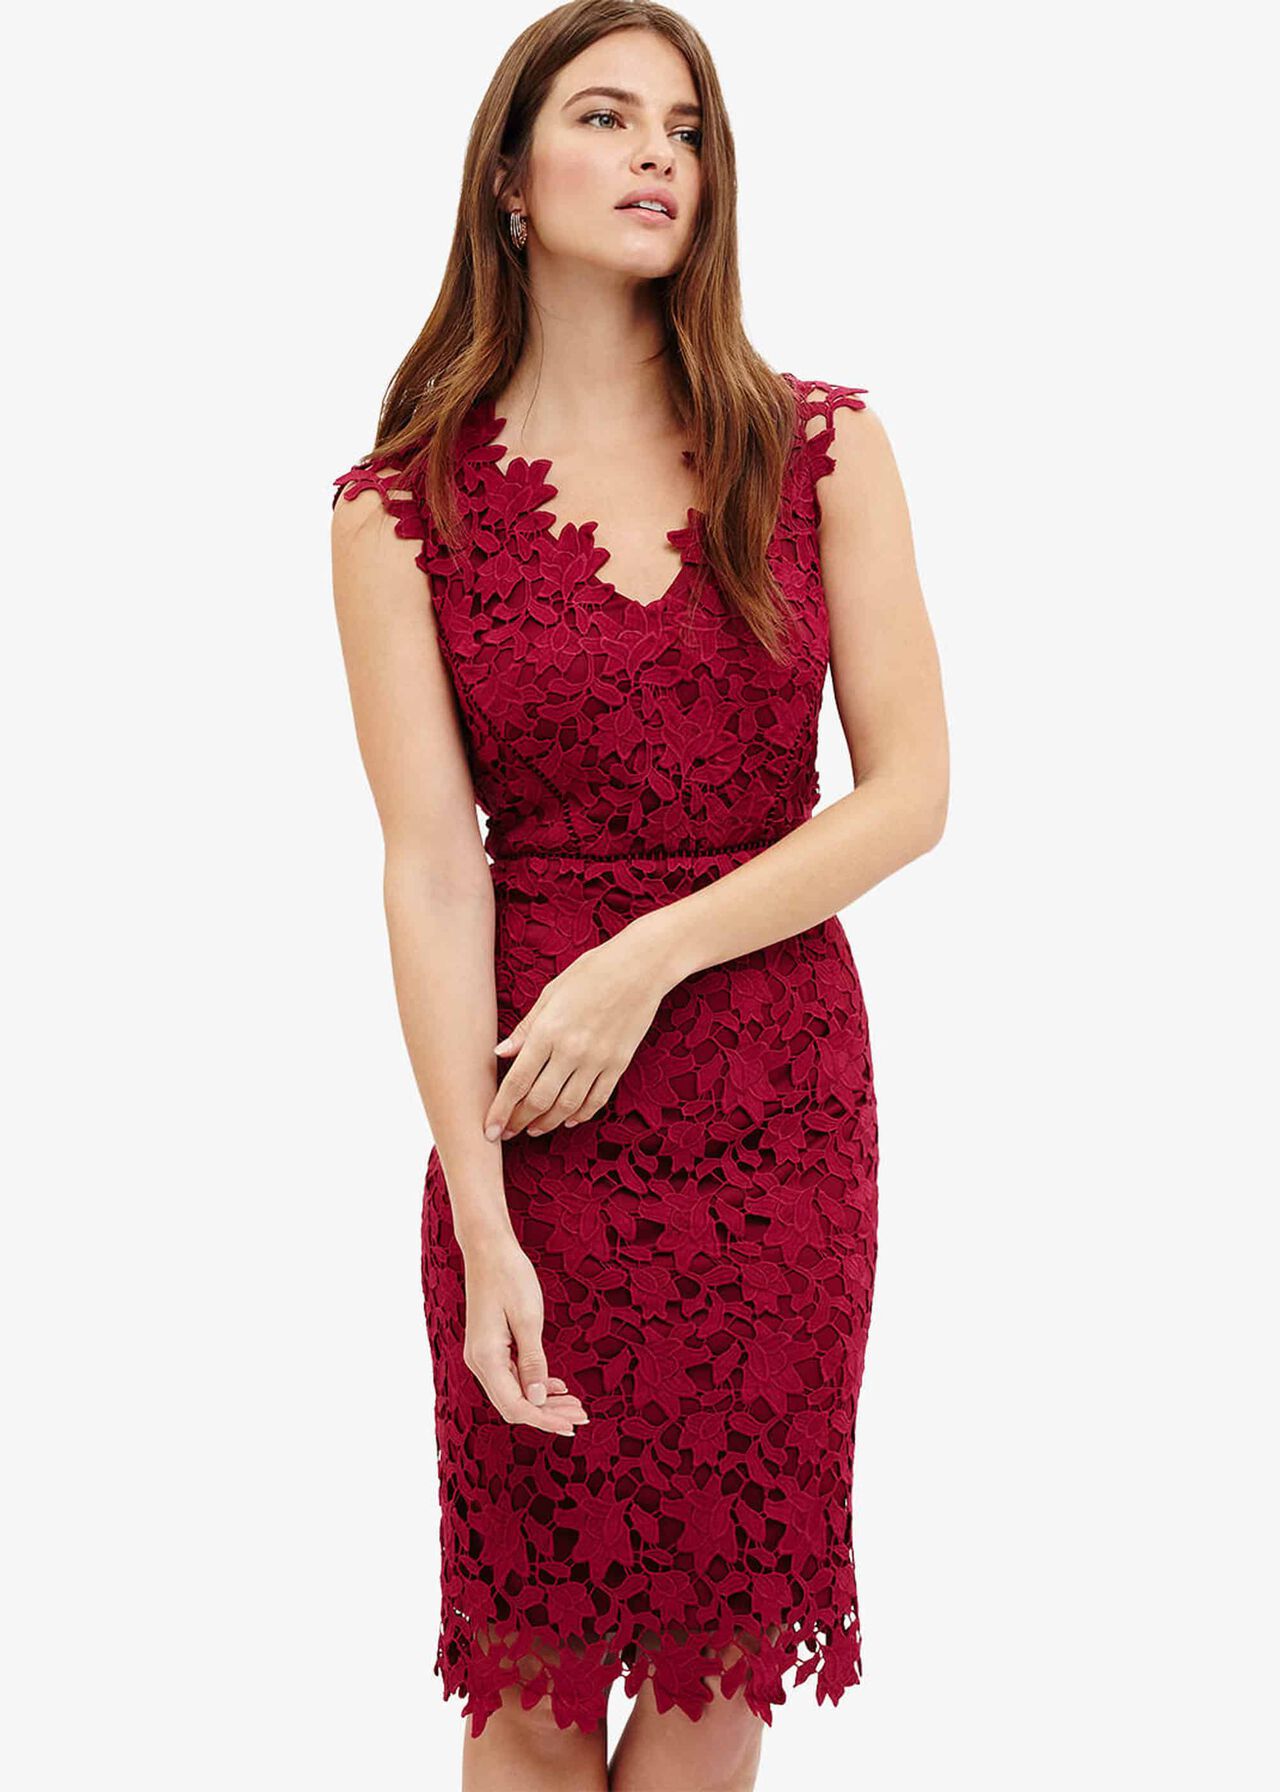 Petals Lace Dress | Phase Eight